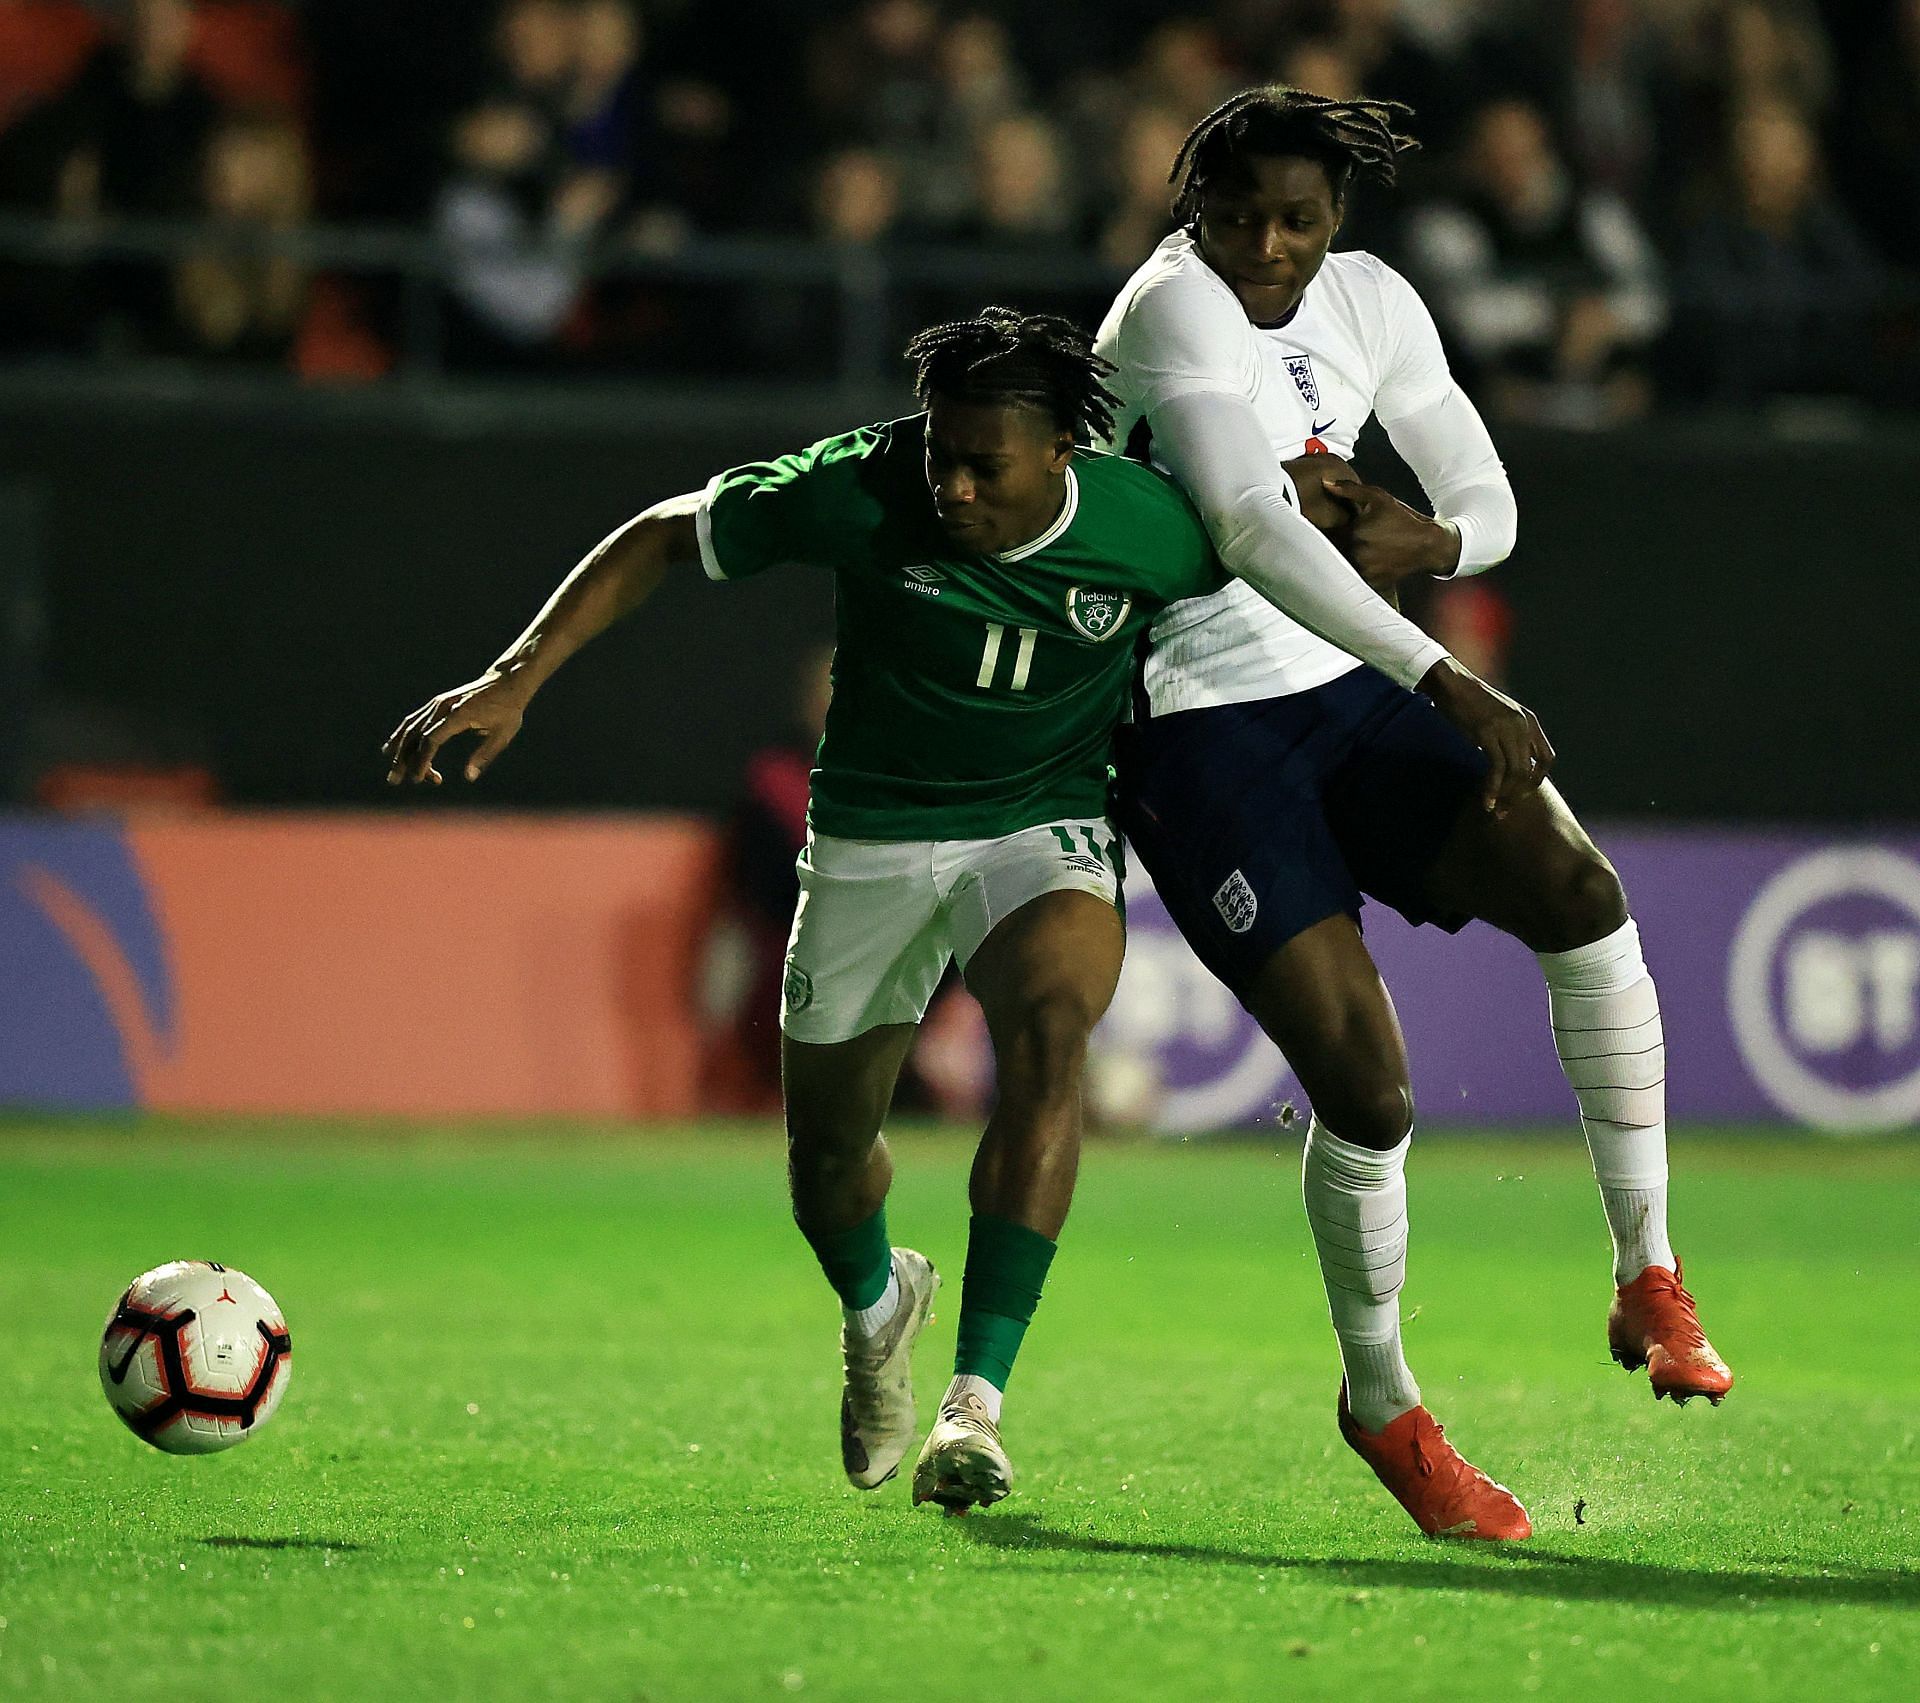 Brooke Norton-Cuffy during a UEFA European Under-19 Championship between England and Ireland